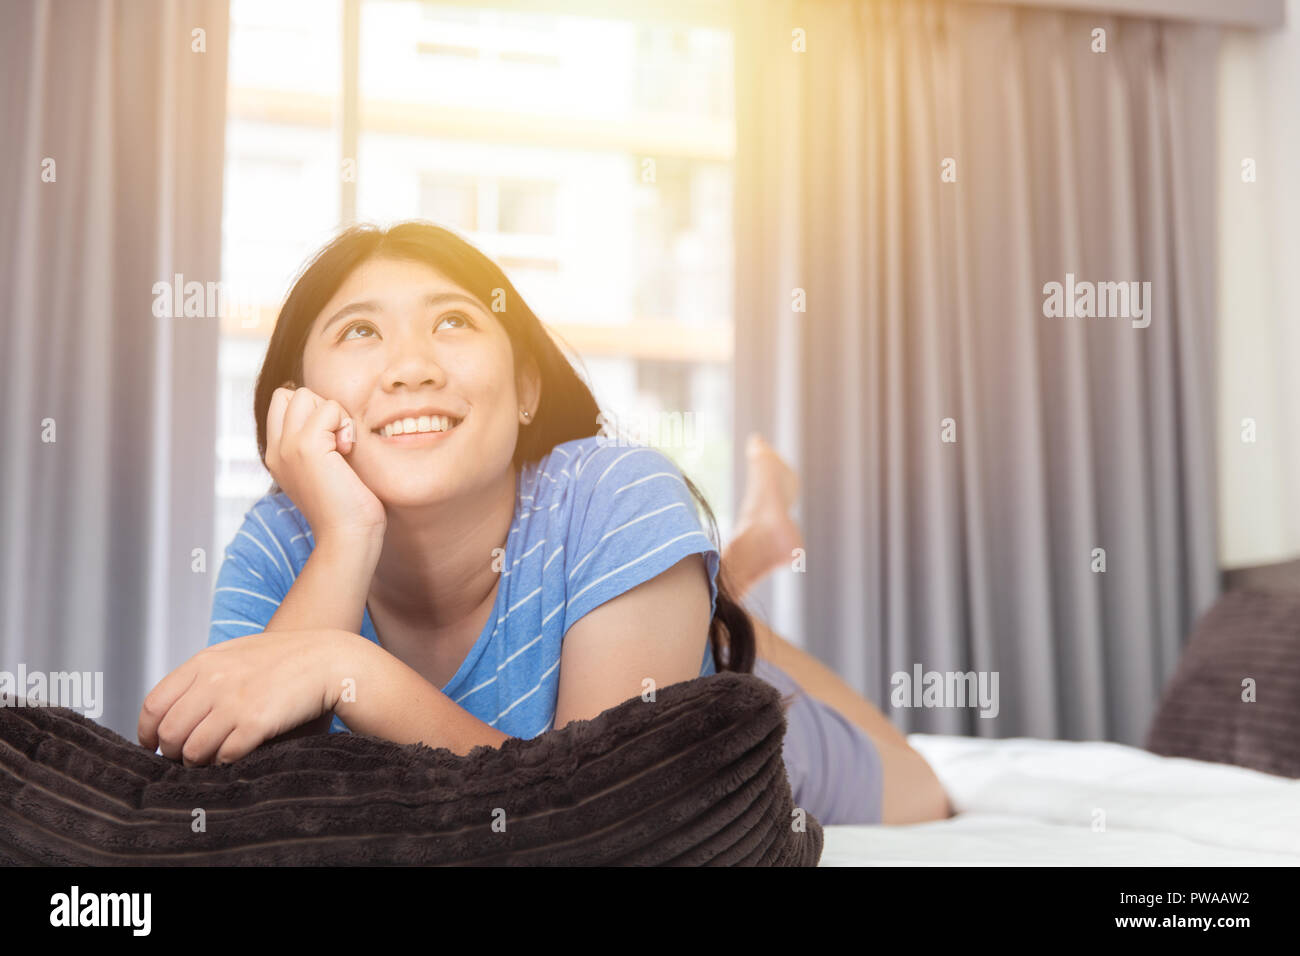 cute Asian girl teen lazy day hand at chin on bed looking high thinking missing daydreaming and smile Stock Photo